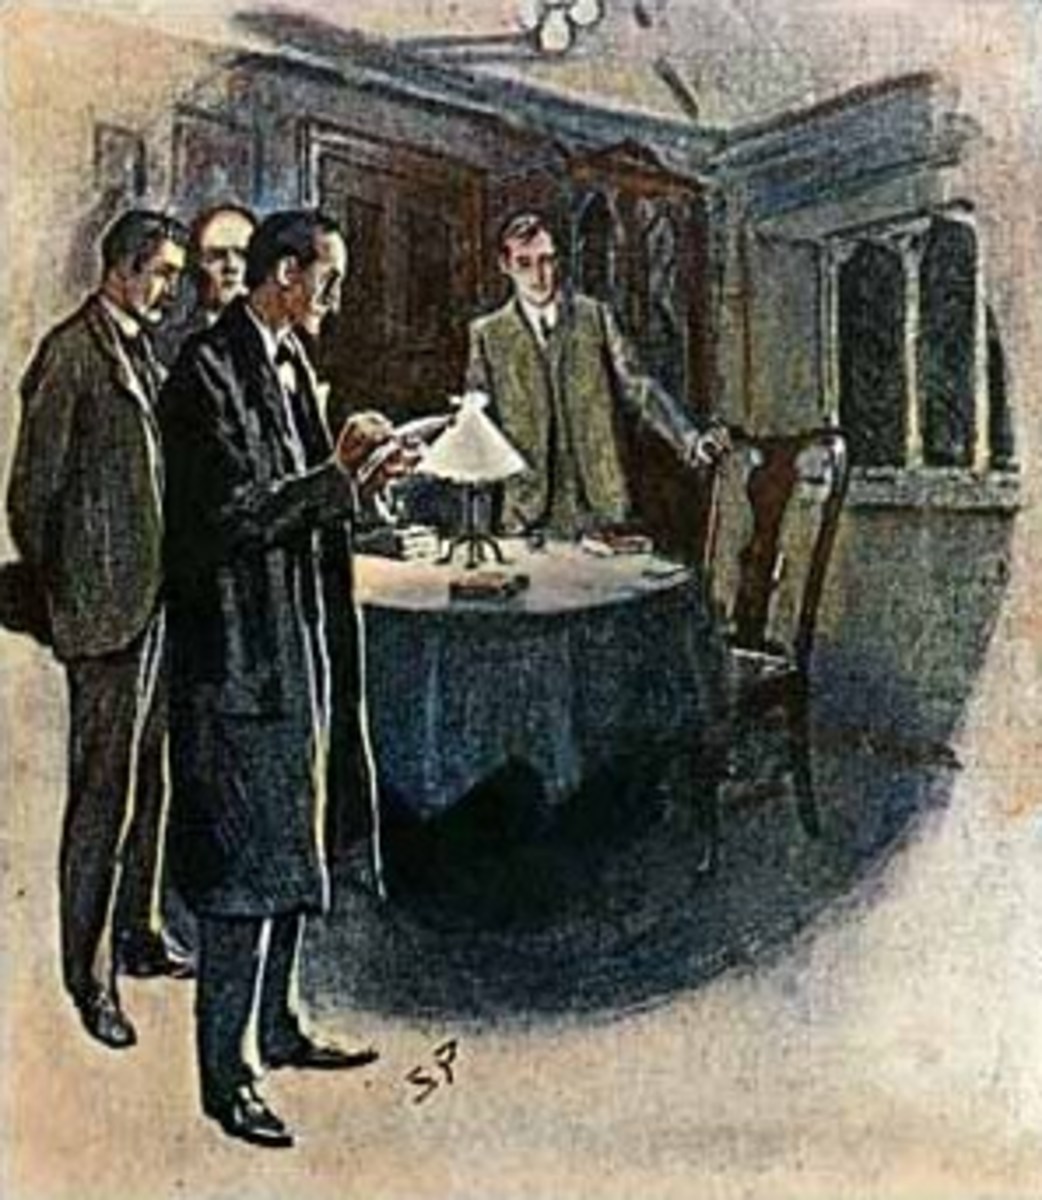 Arthur Conan Doyle, The Adventure of the Three Students (1904), Illustration by Sidney Paget, in The Strand Magazine